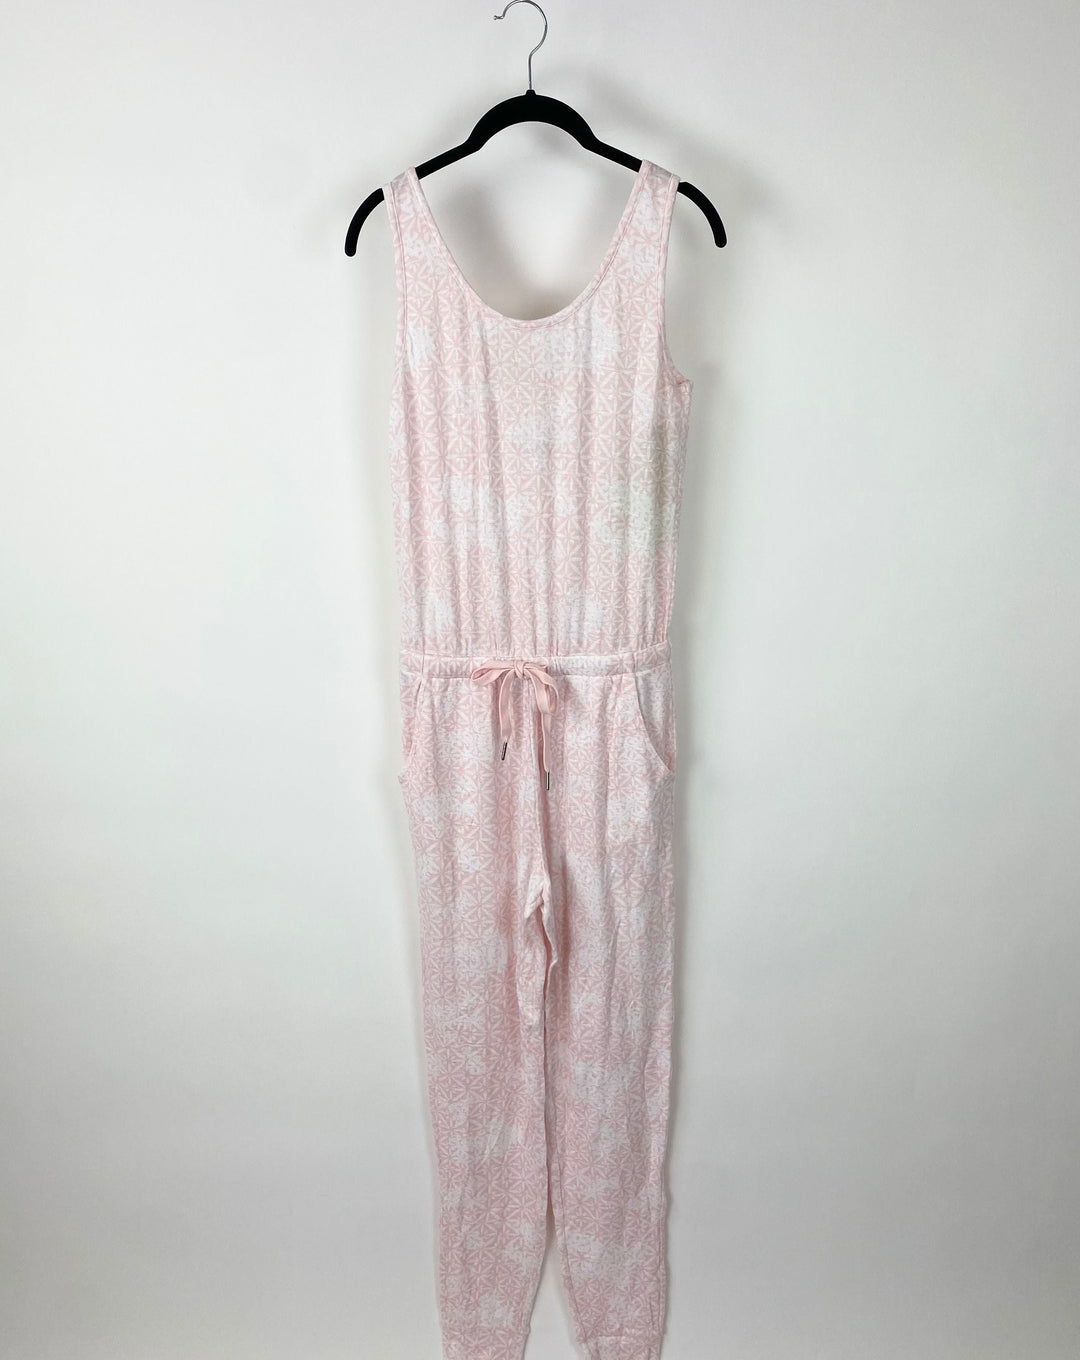 Pink And White Jumpsuit - Extra Small, Small